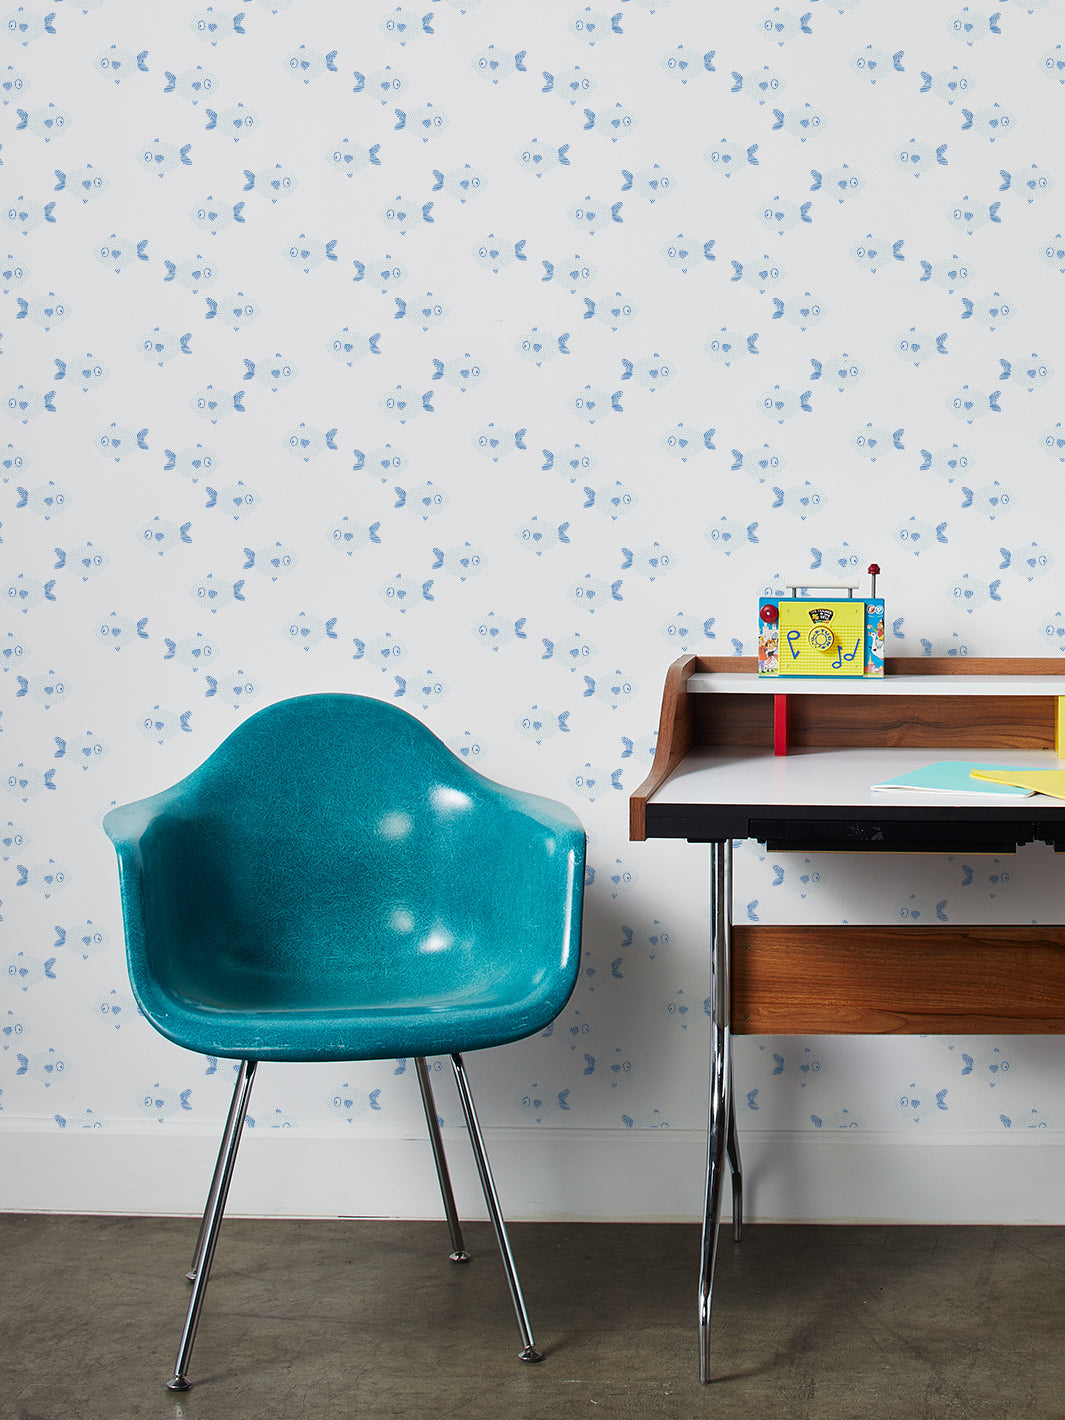 'School of Fish' Wallpaper by Tea Collection - Pale Blue